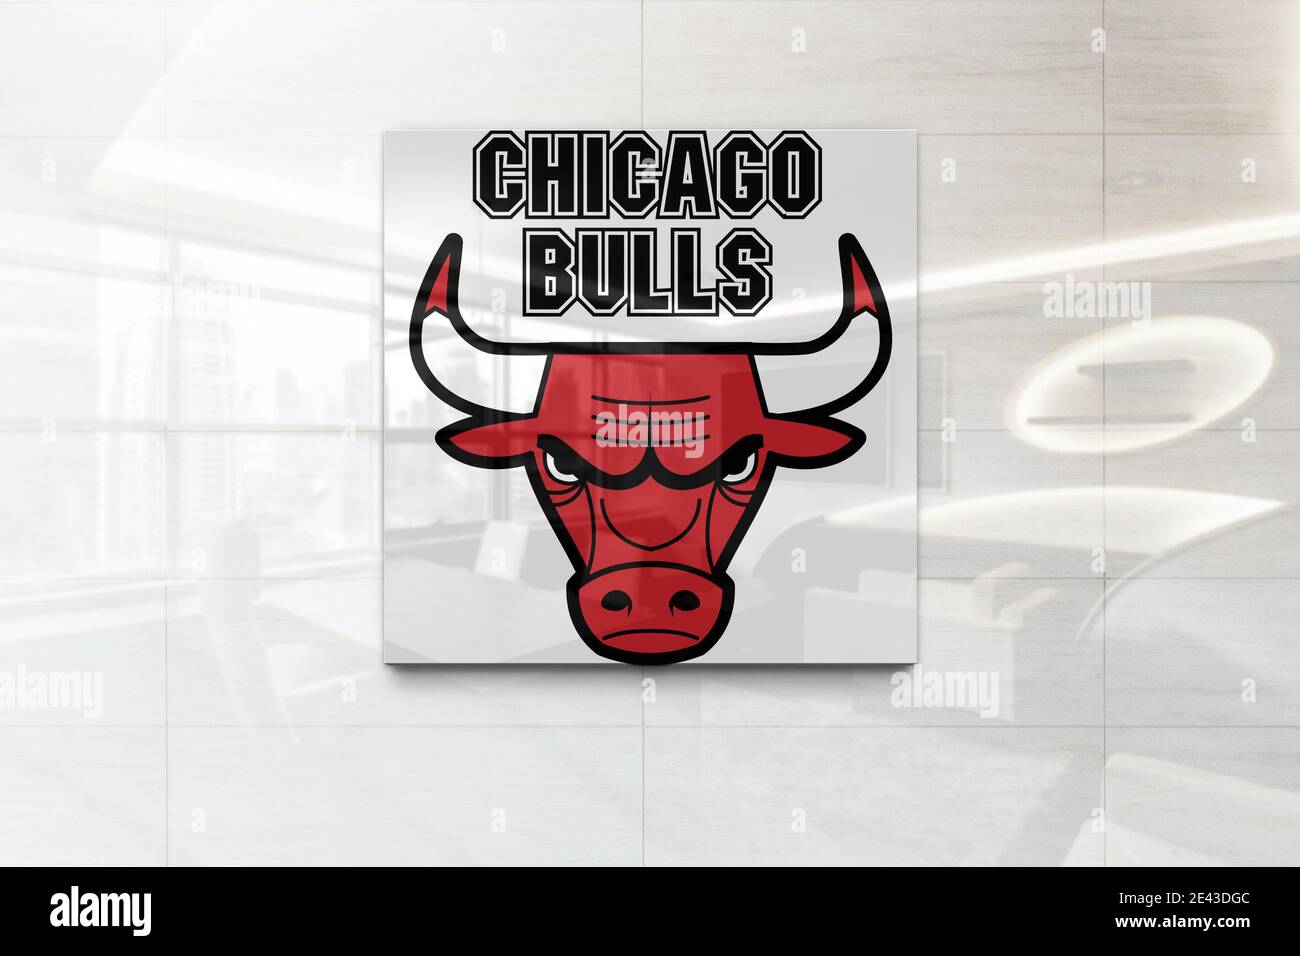 chicago bulls logo on reflective business wall plaque Stock Photo